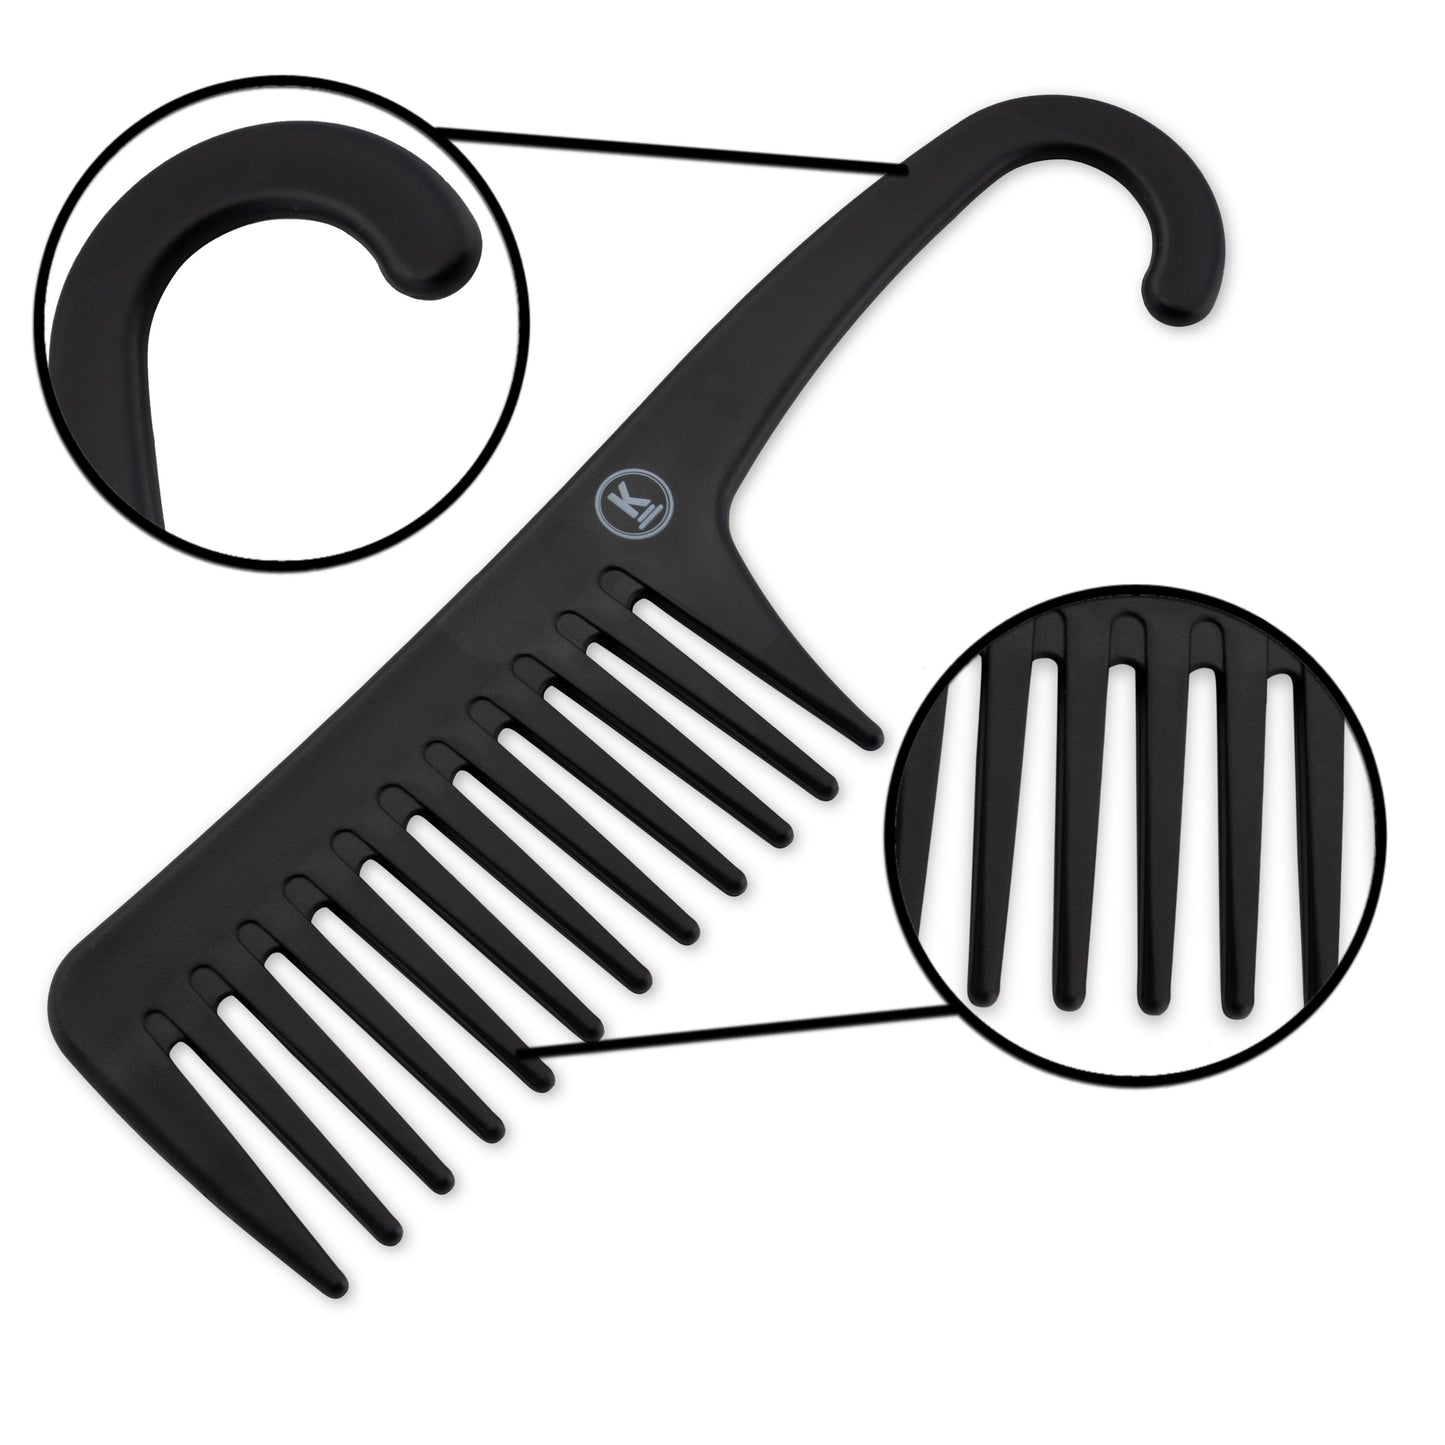 K-Pro wide tooth comb